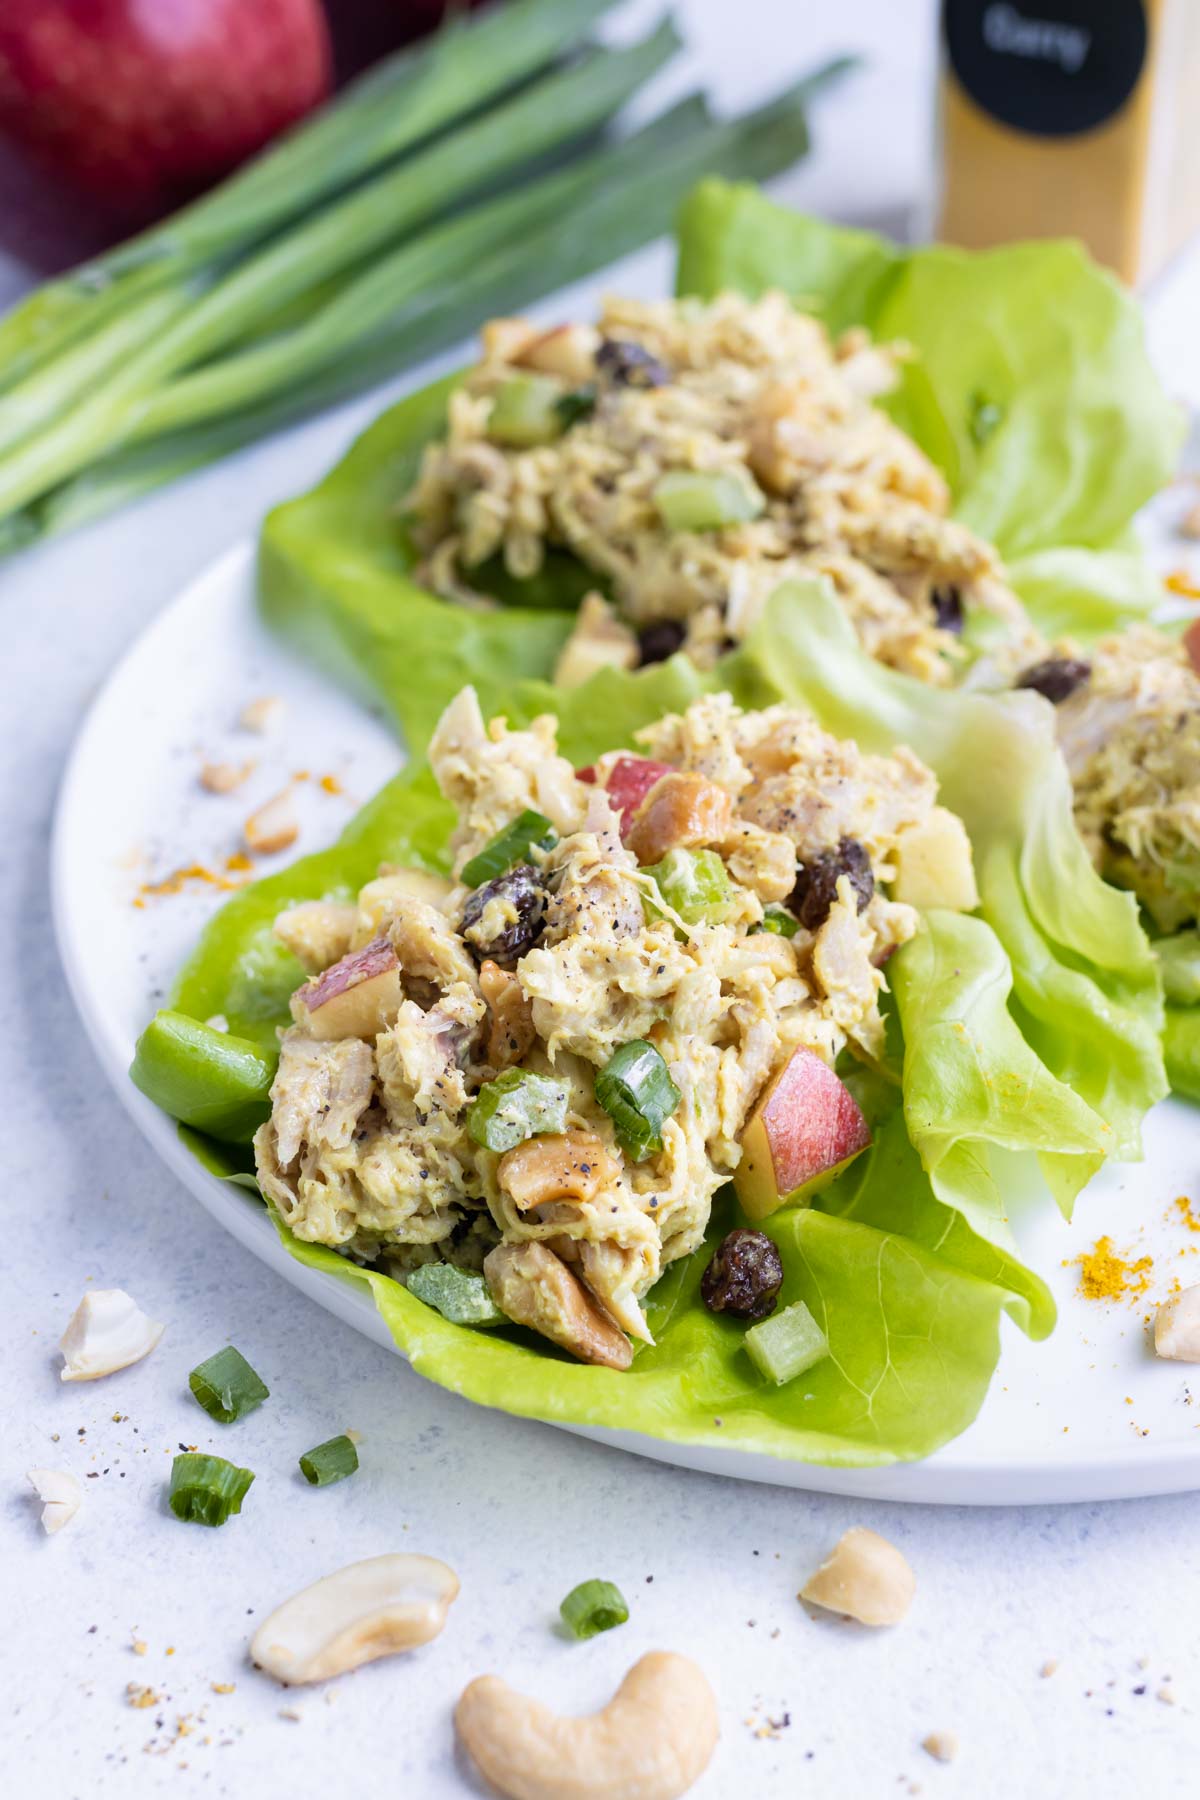 Curry chicken salad is wrapped in butter lettuce leaves.